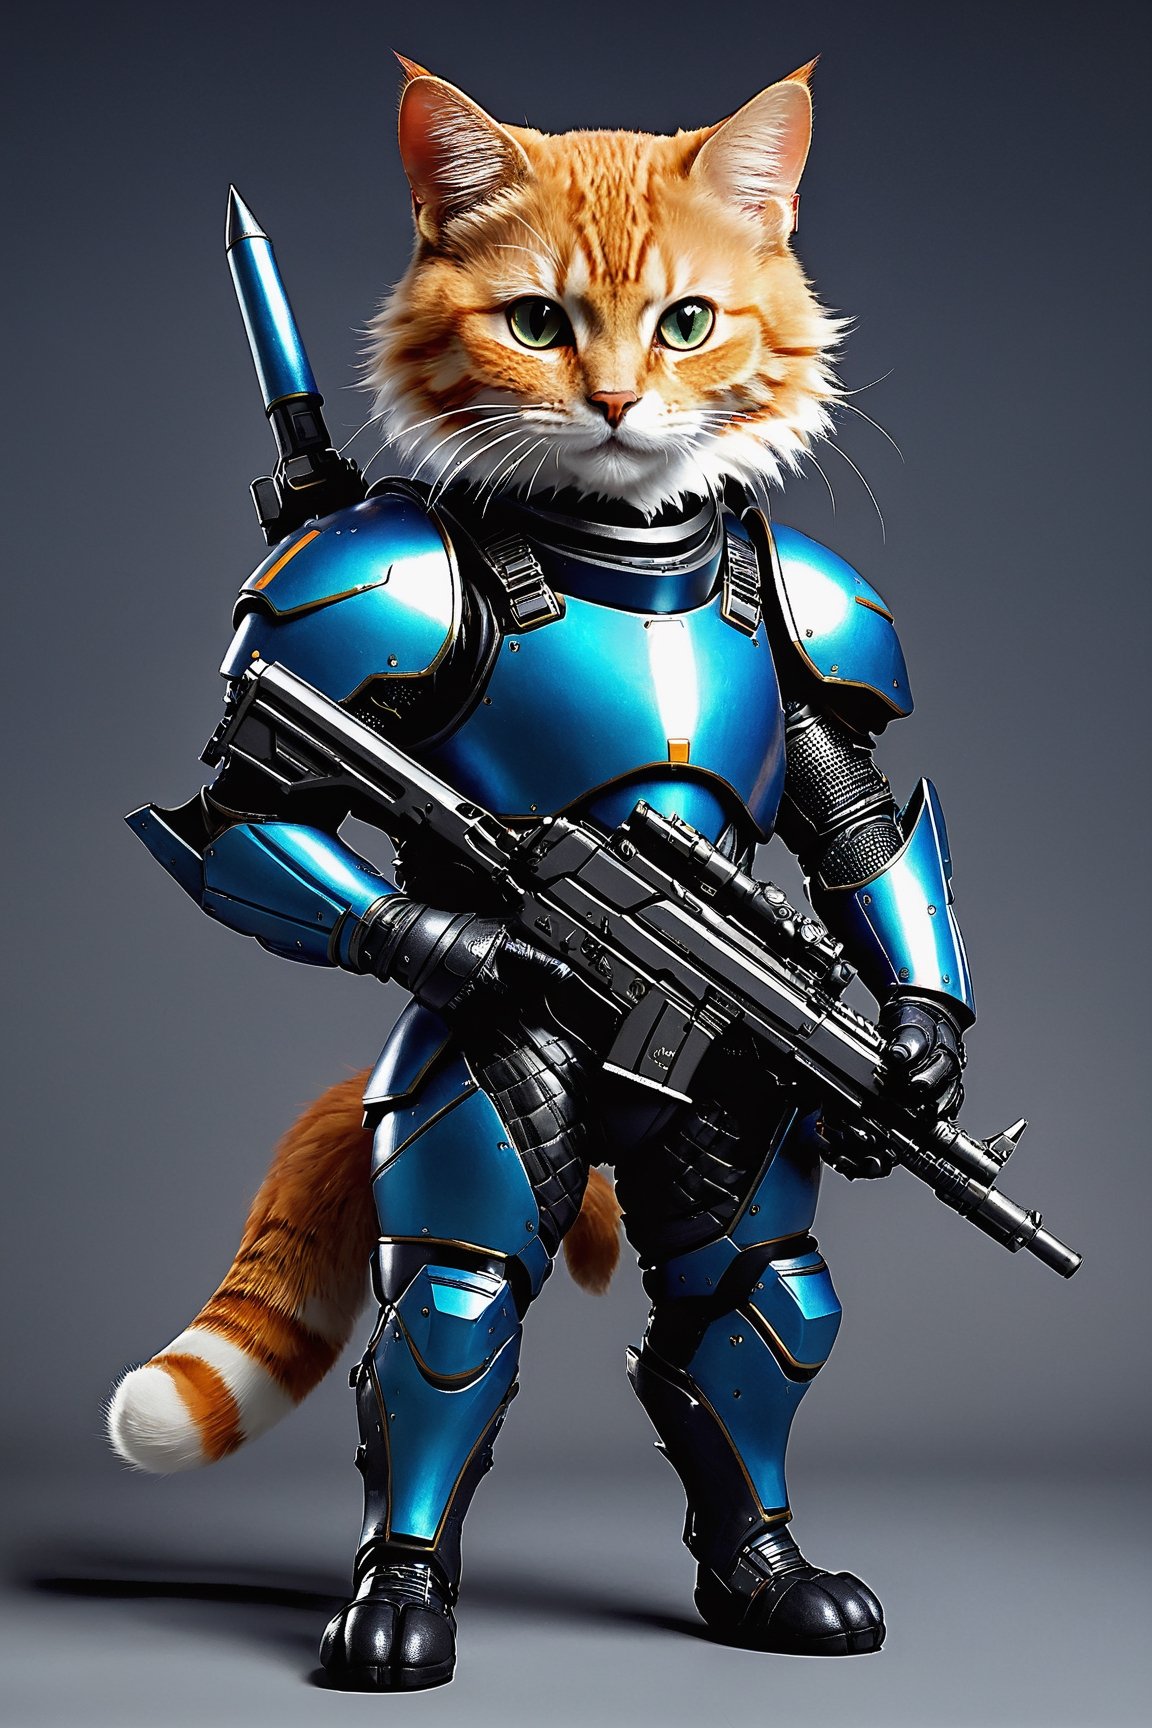 A anthropomorphic cat with futuristic armor and a weapon(gun)